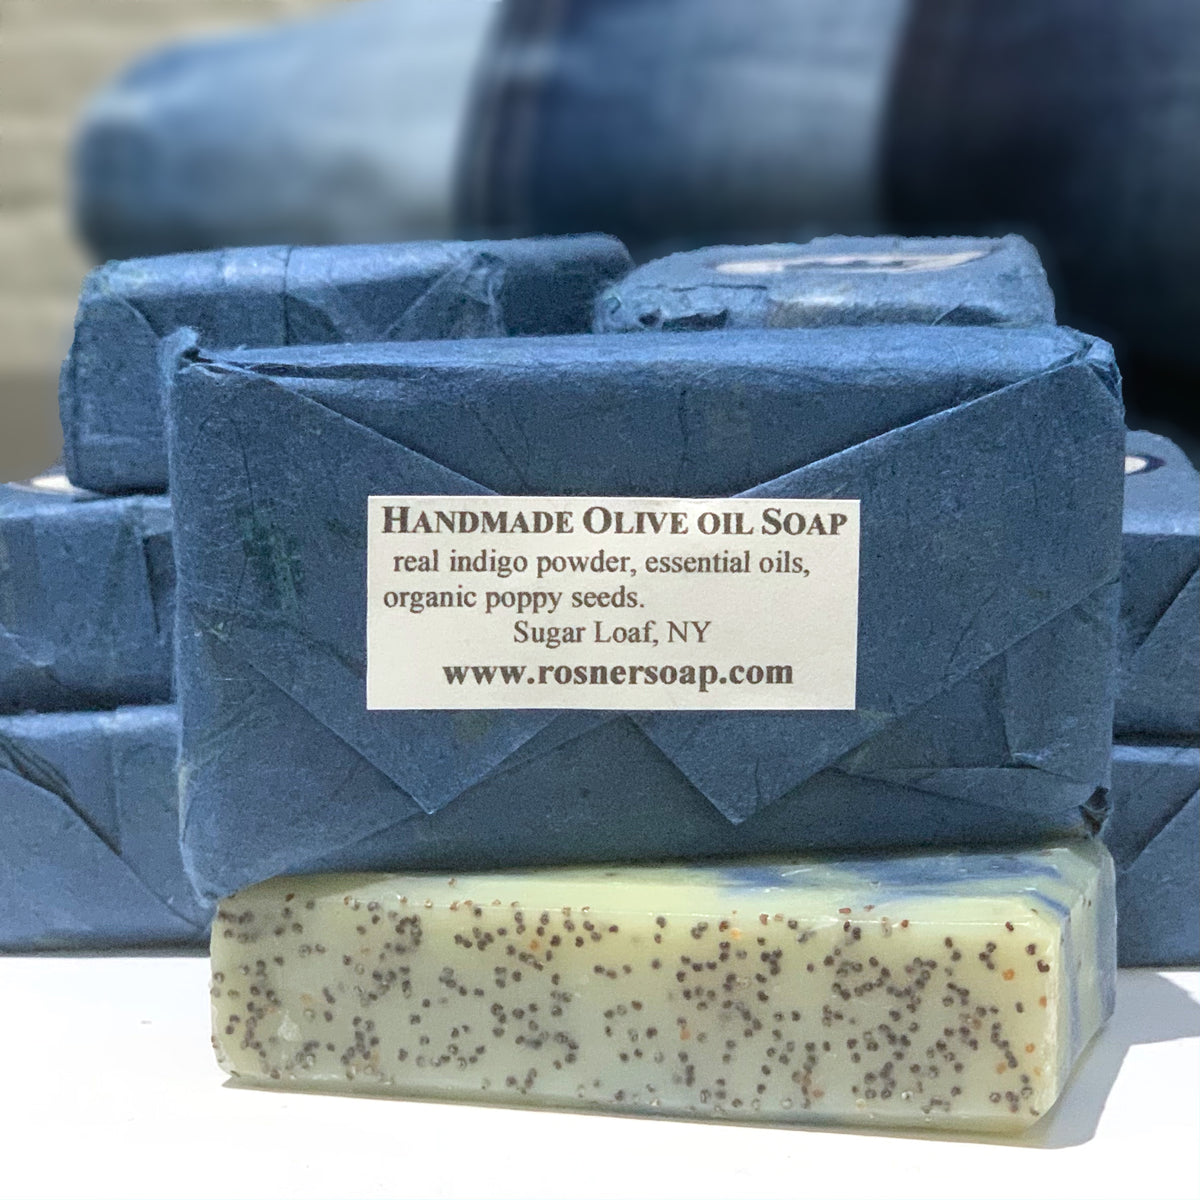 Hand-Made Indigo, Organic Poppy Seed and Essential Oil Soap